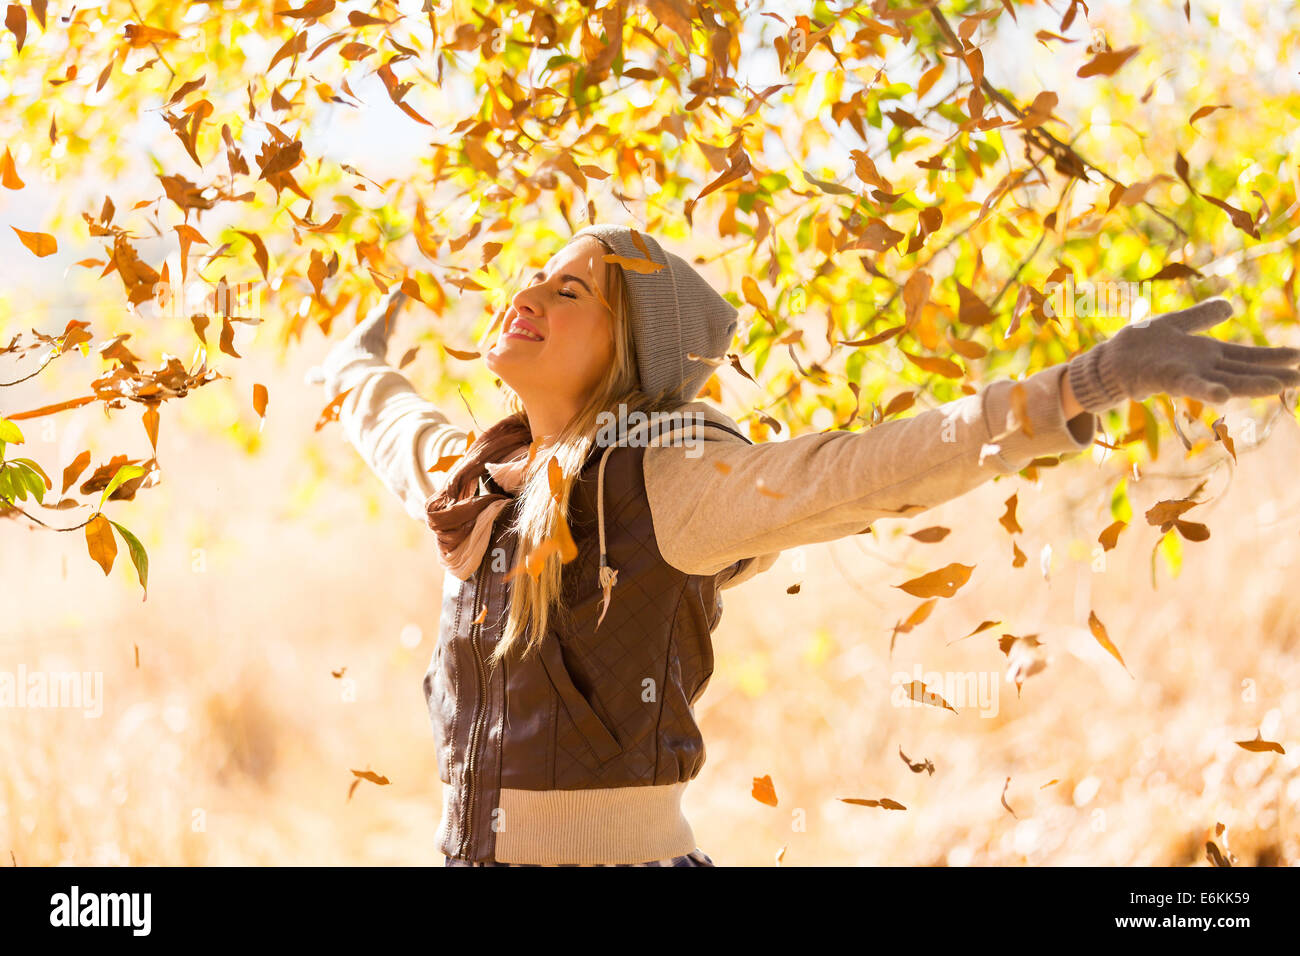 autumn leaves falling on happy young woman in forest Stock Photo